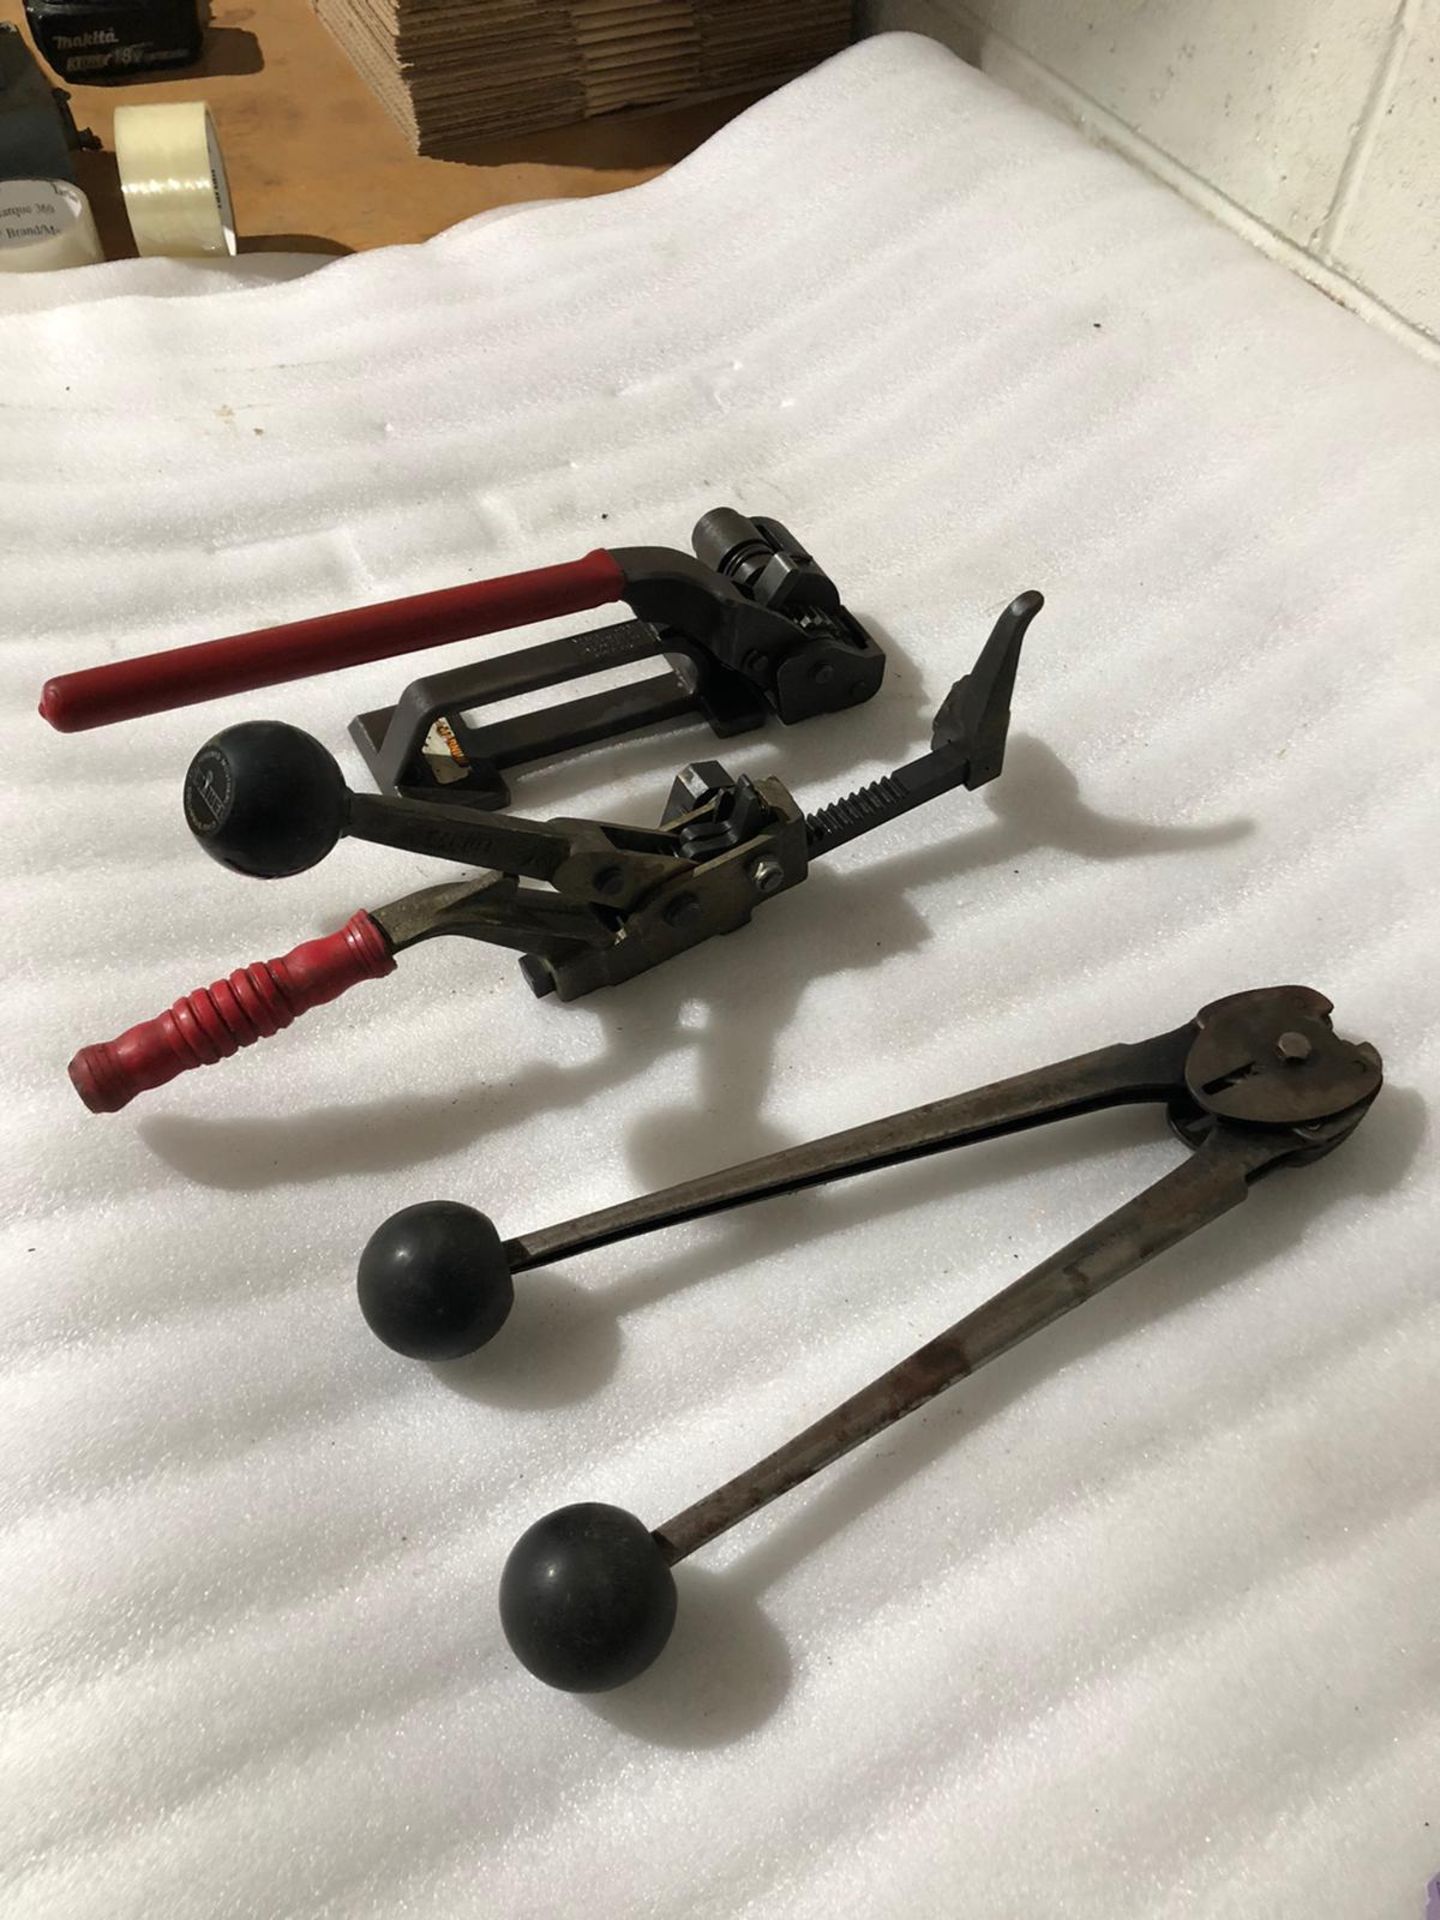 Lot of 3 (3 units) Tensioner & Crimper Units for Steel Strapping - Image 2 of 2